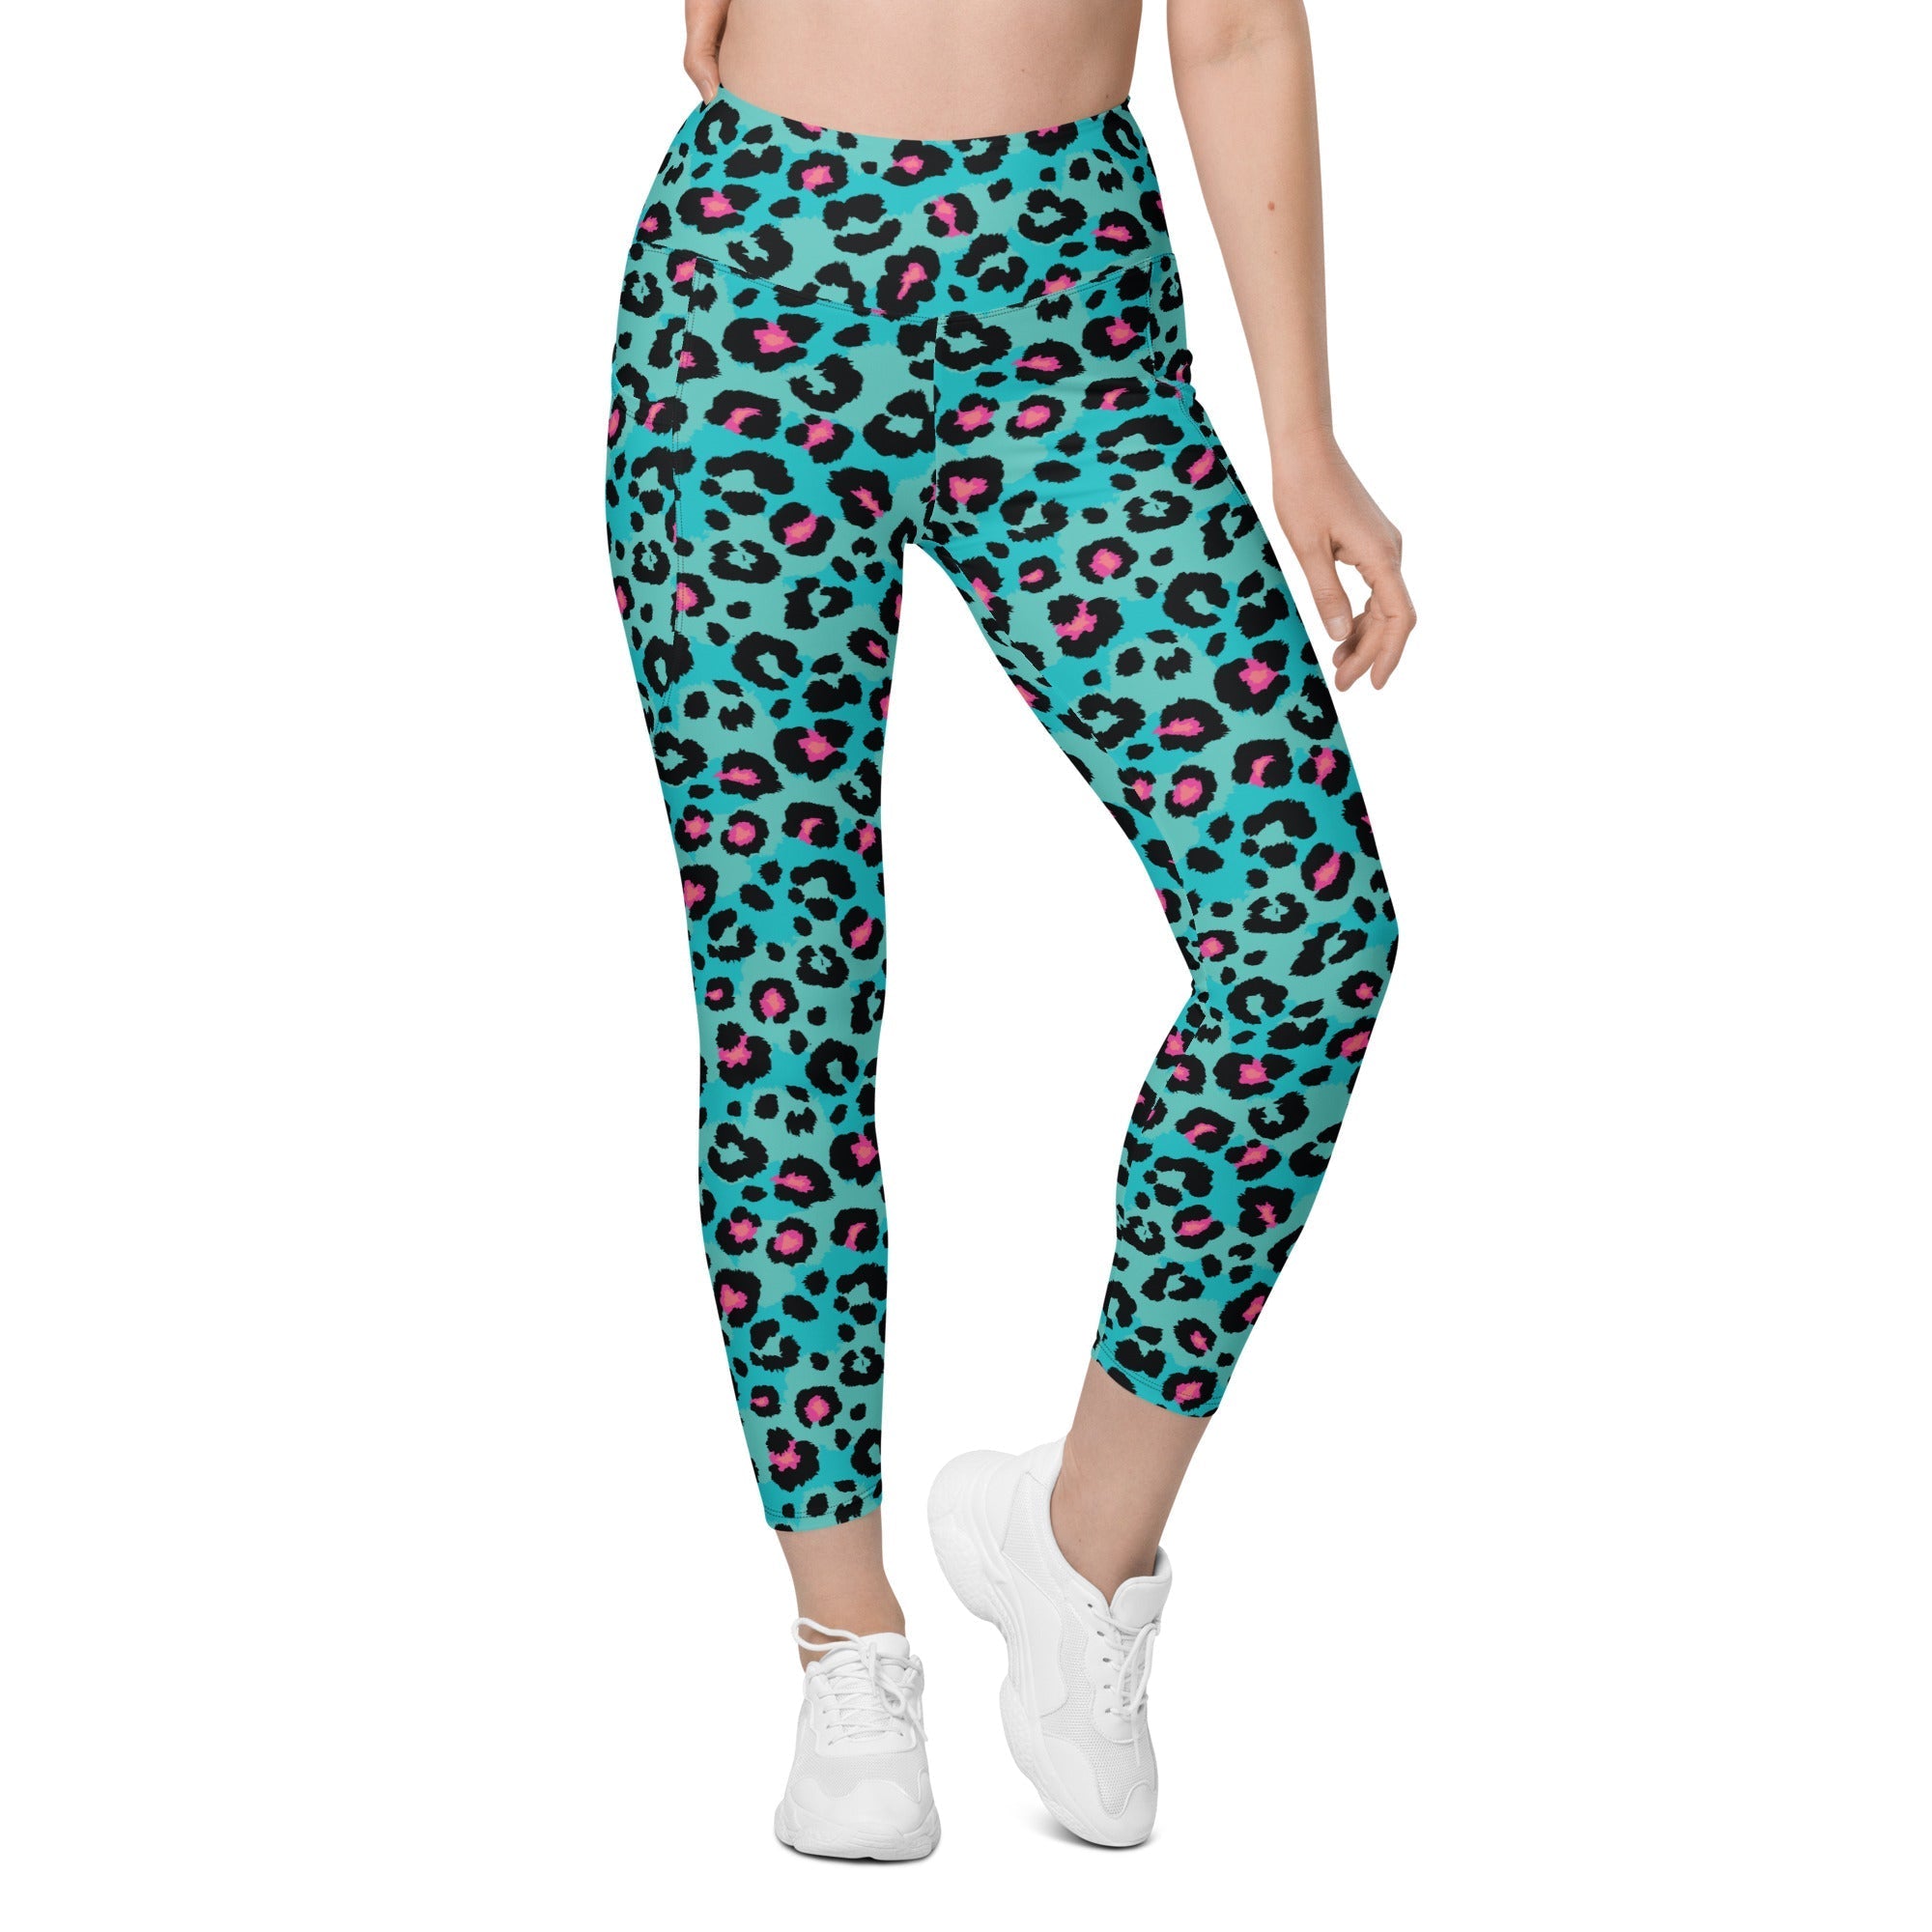 Turquoise Leopard Print Leggings With Pockets